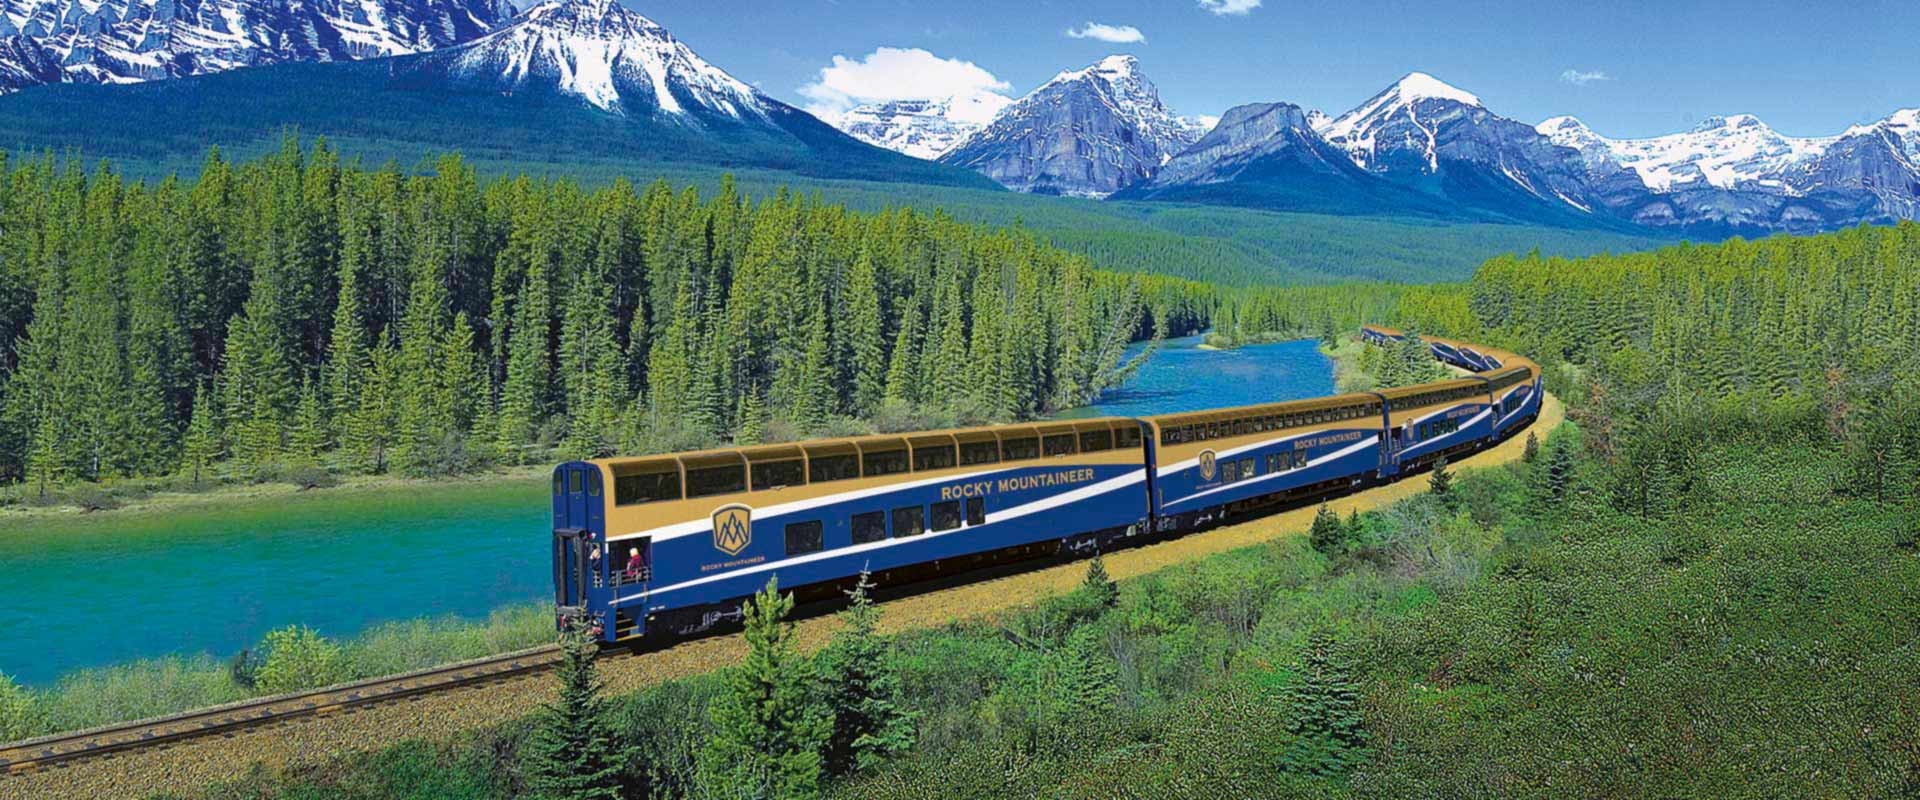 Magnificent Canadian Rockies & Rail 2019 (Start Vancouver, End Victoria